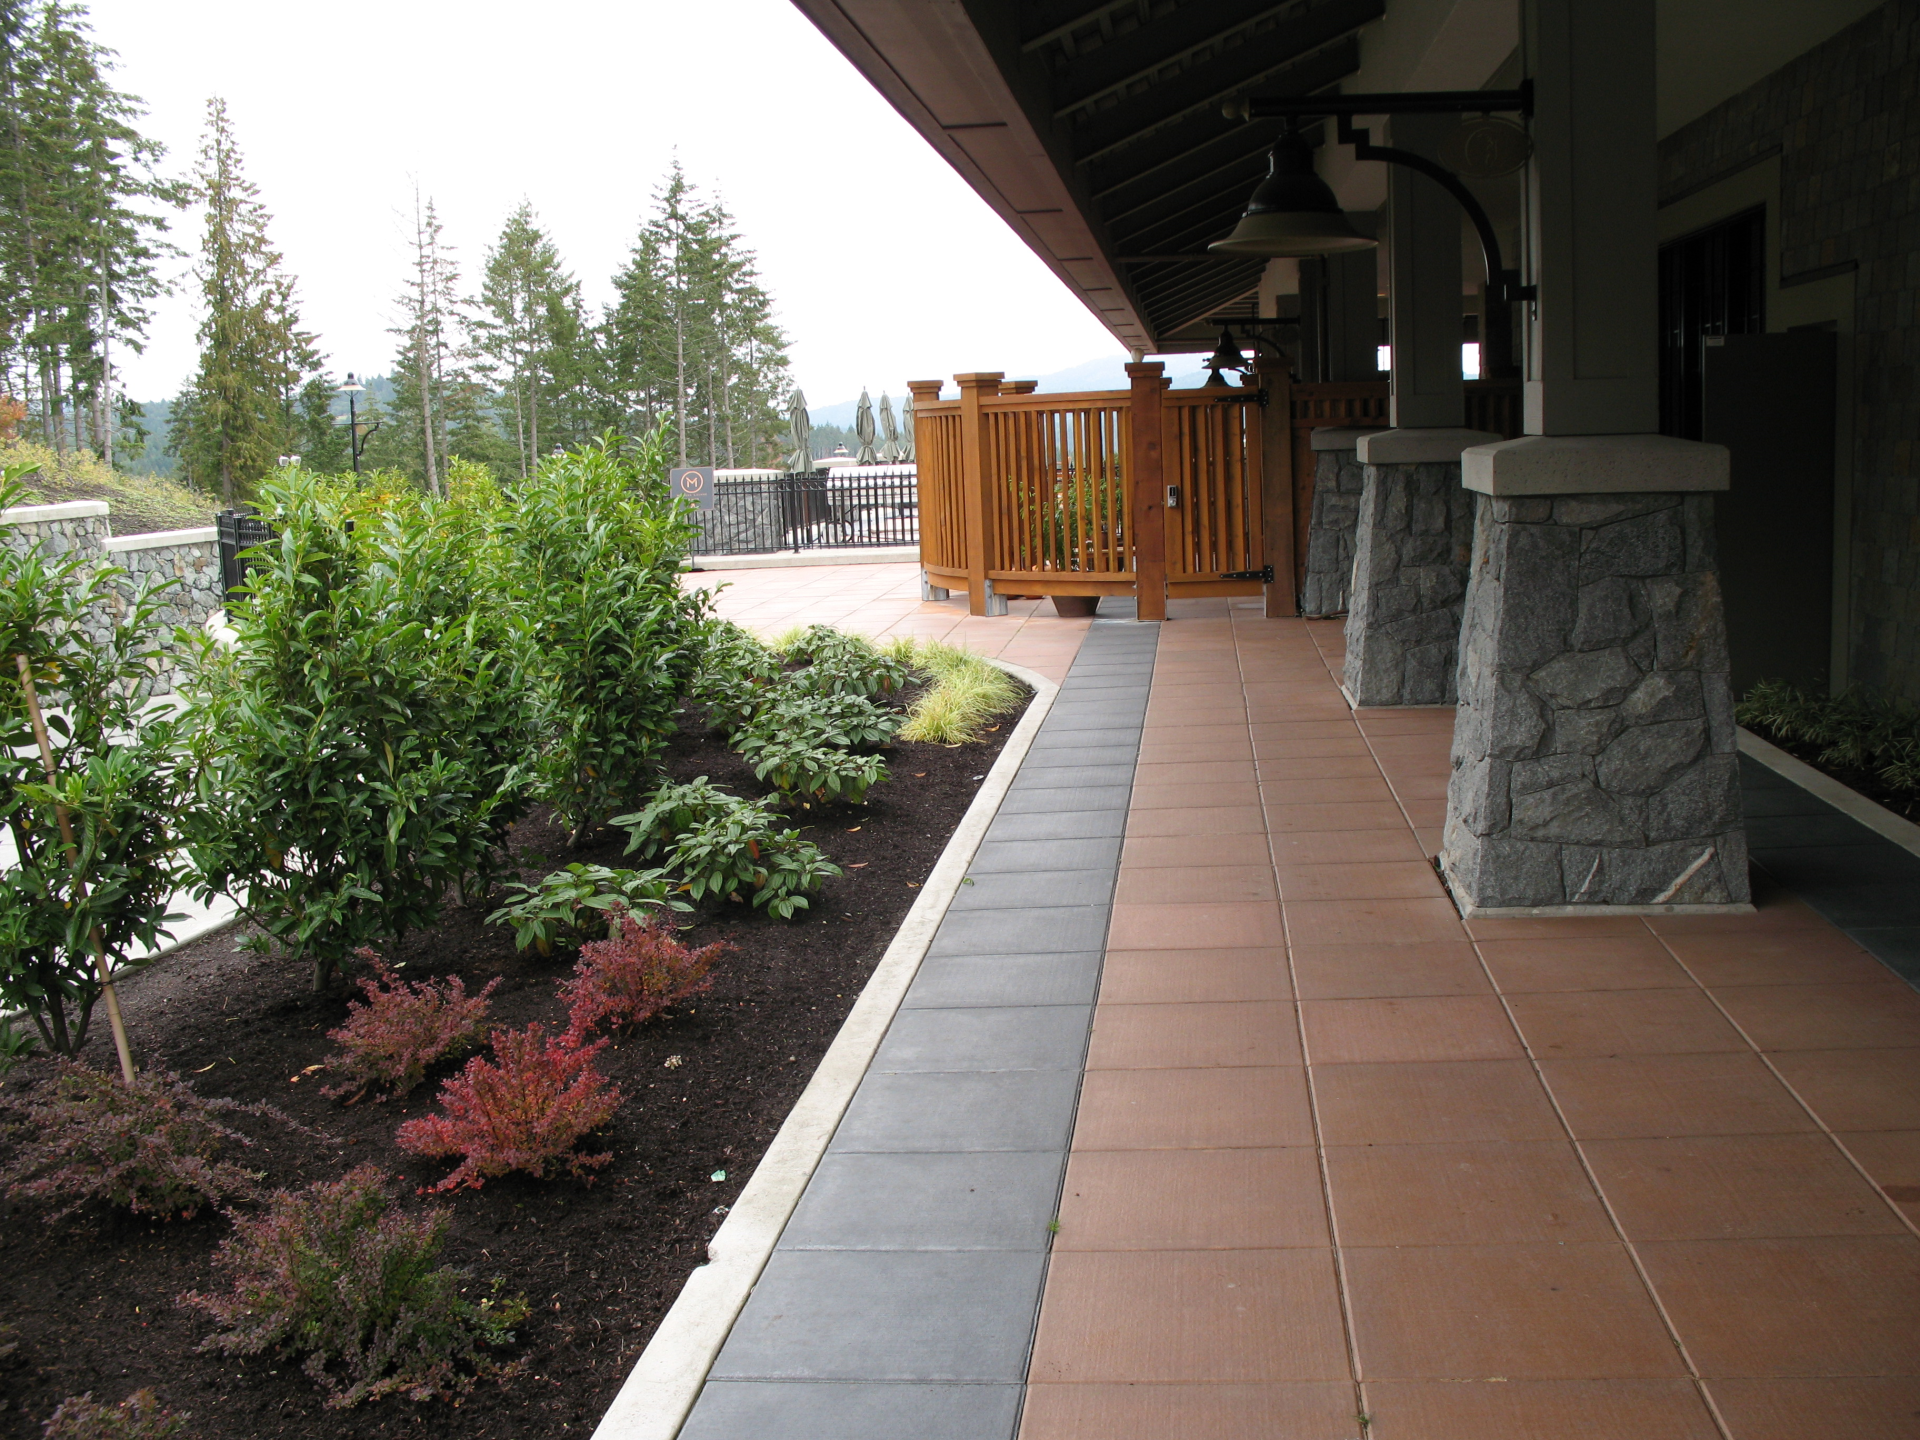 Commercial patio designed with large square flagstones